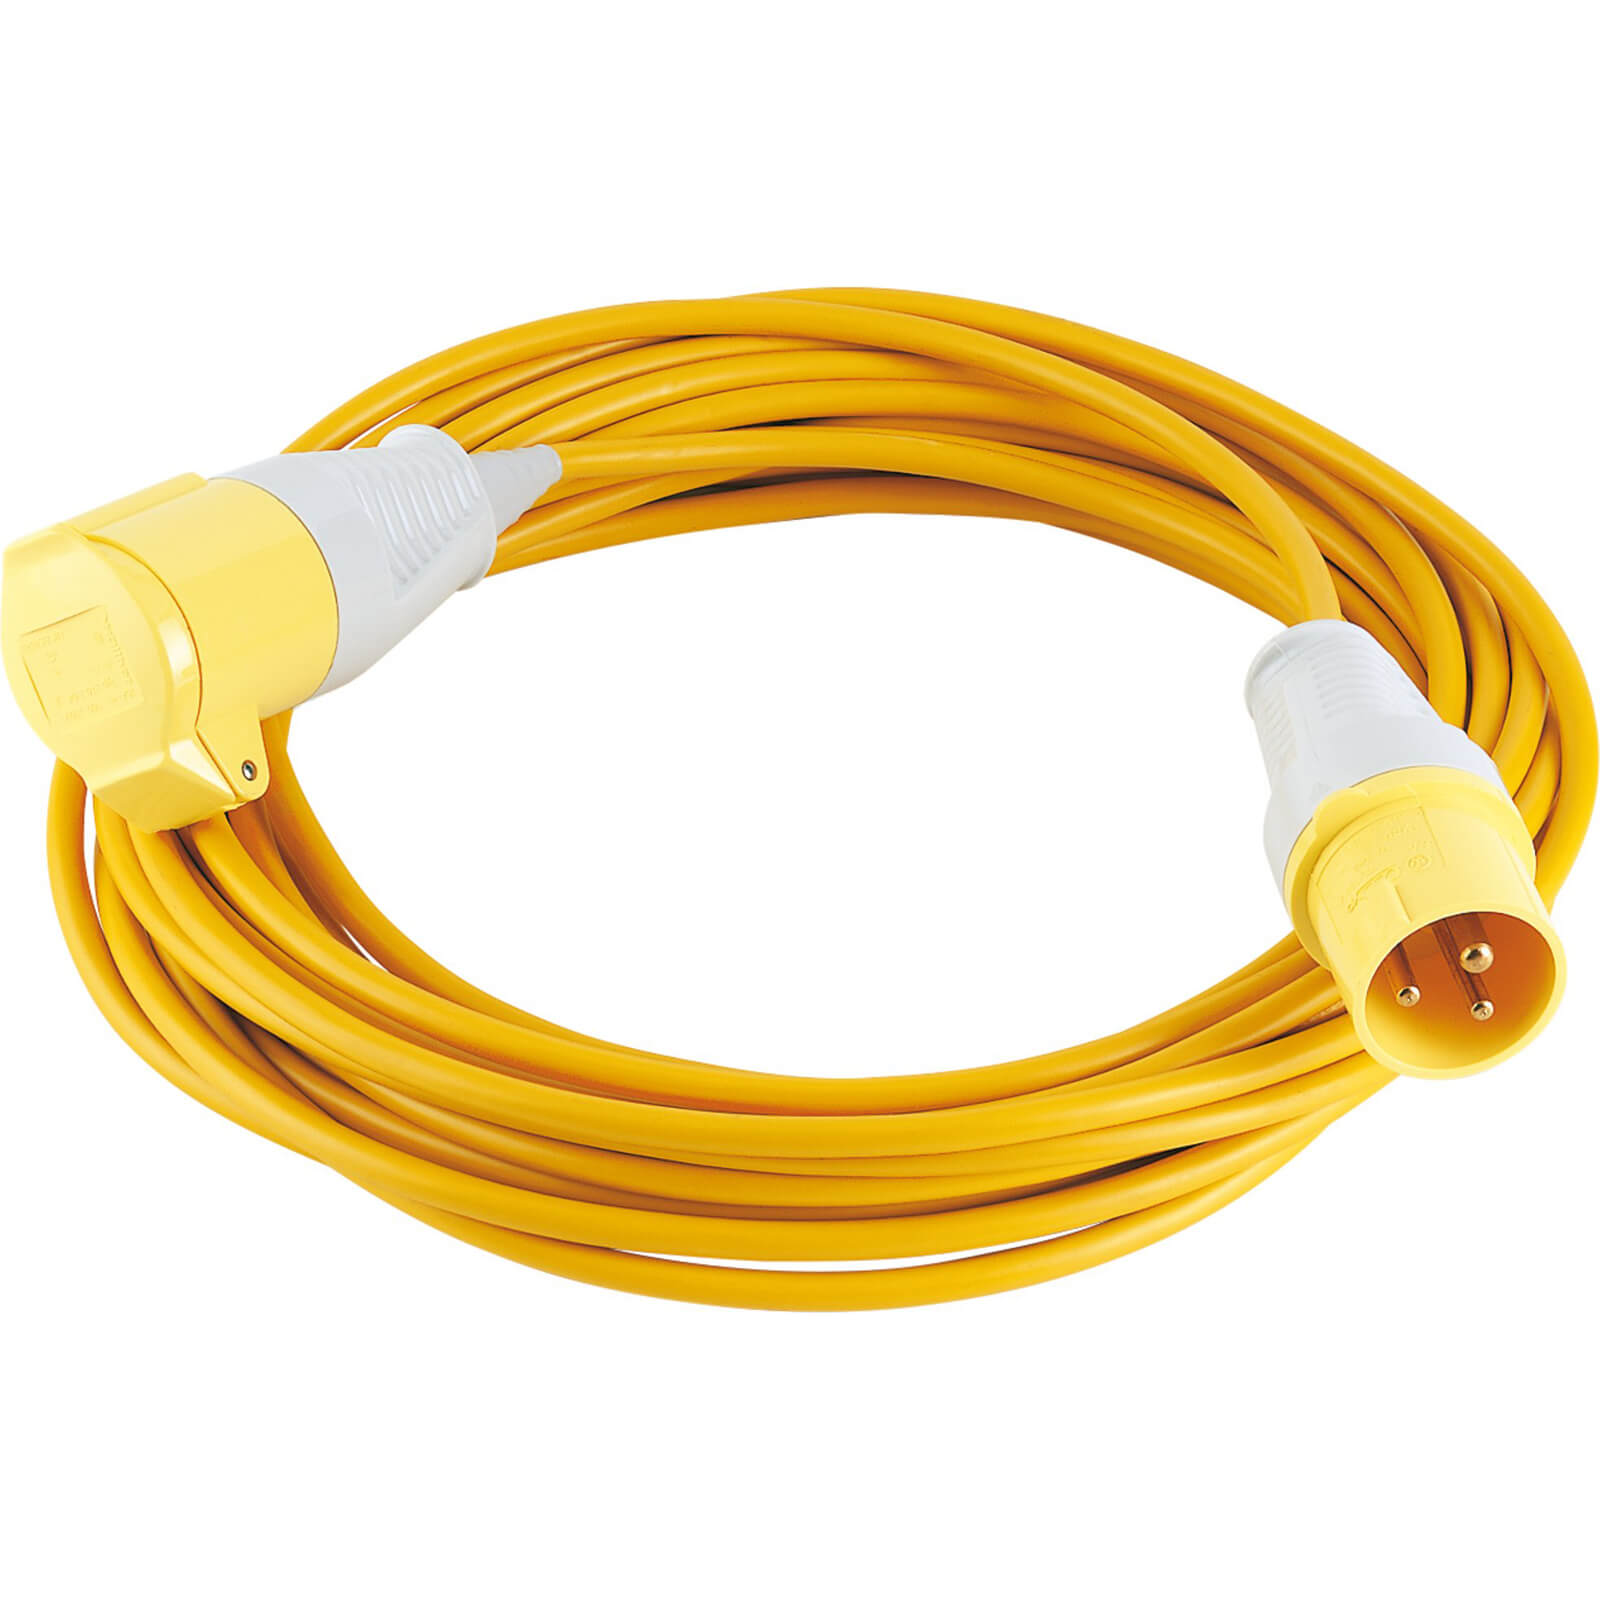 Image of Draper Extension Trailing Lead 16 amp Yellow Cable 110v 14m